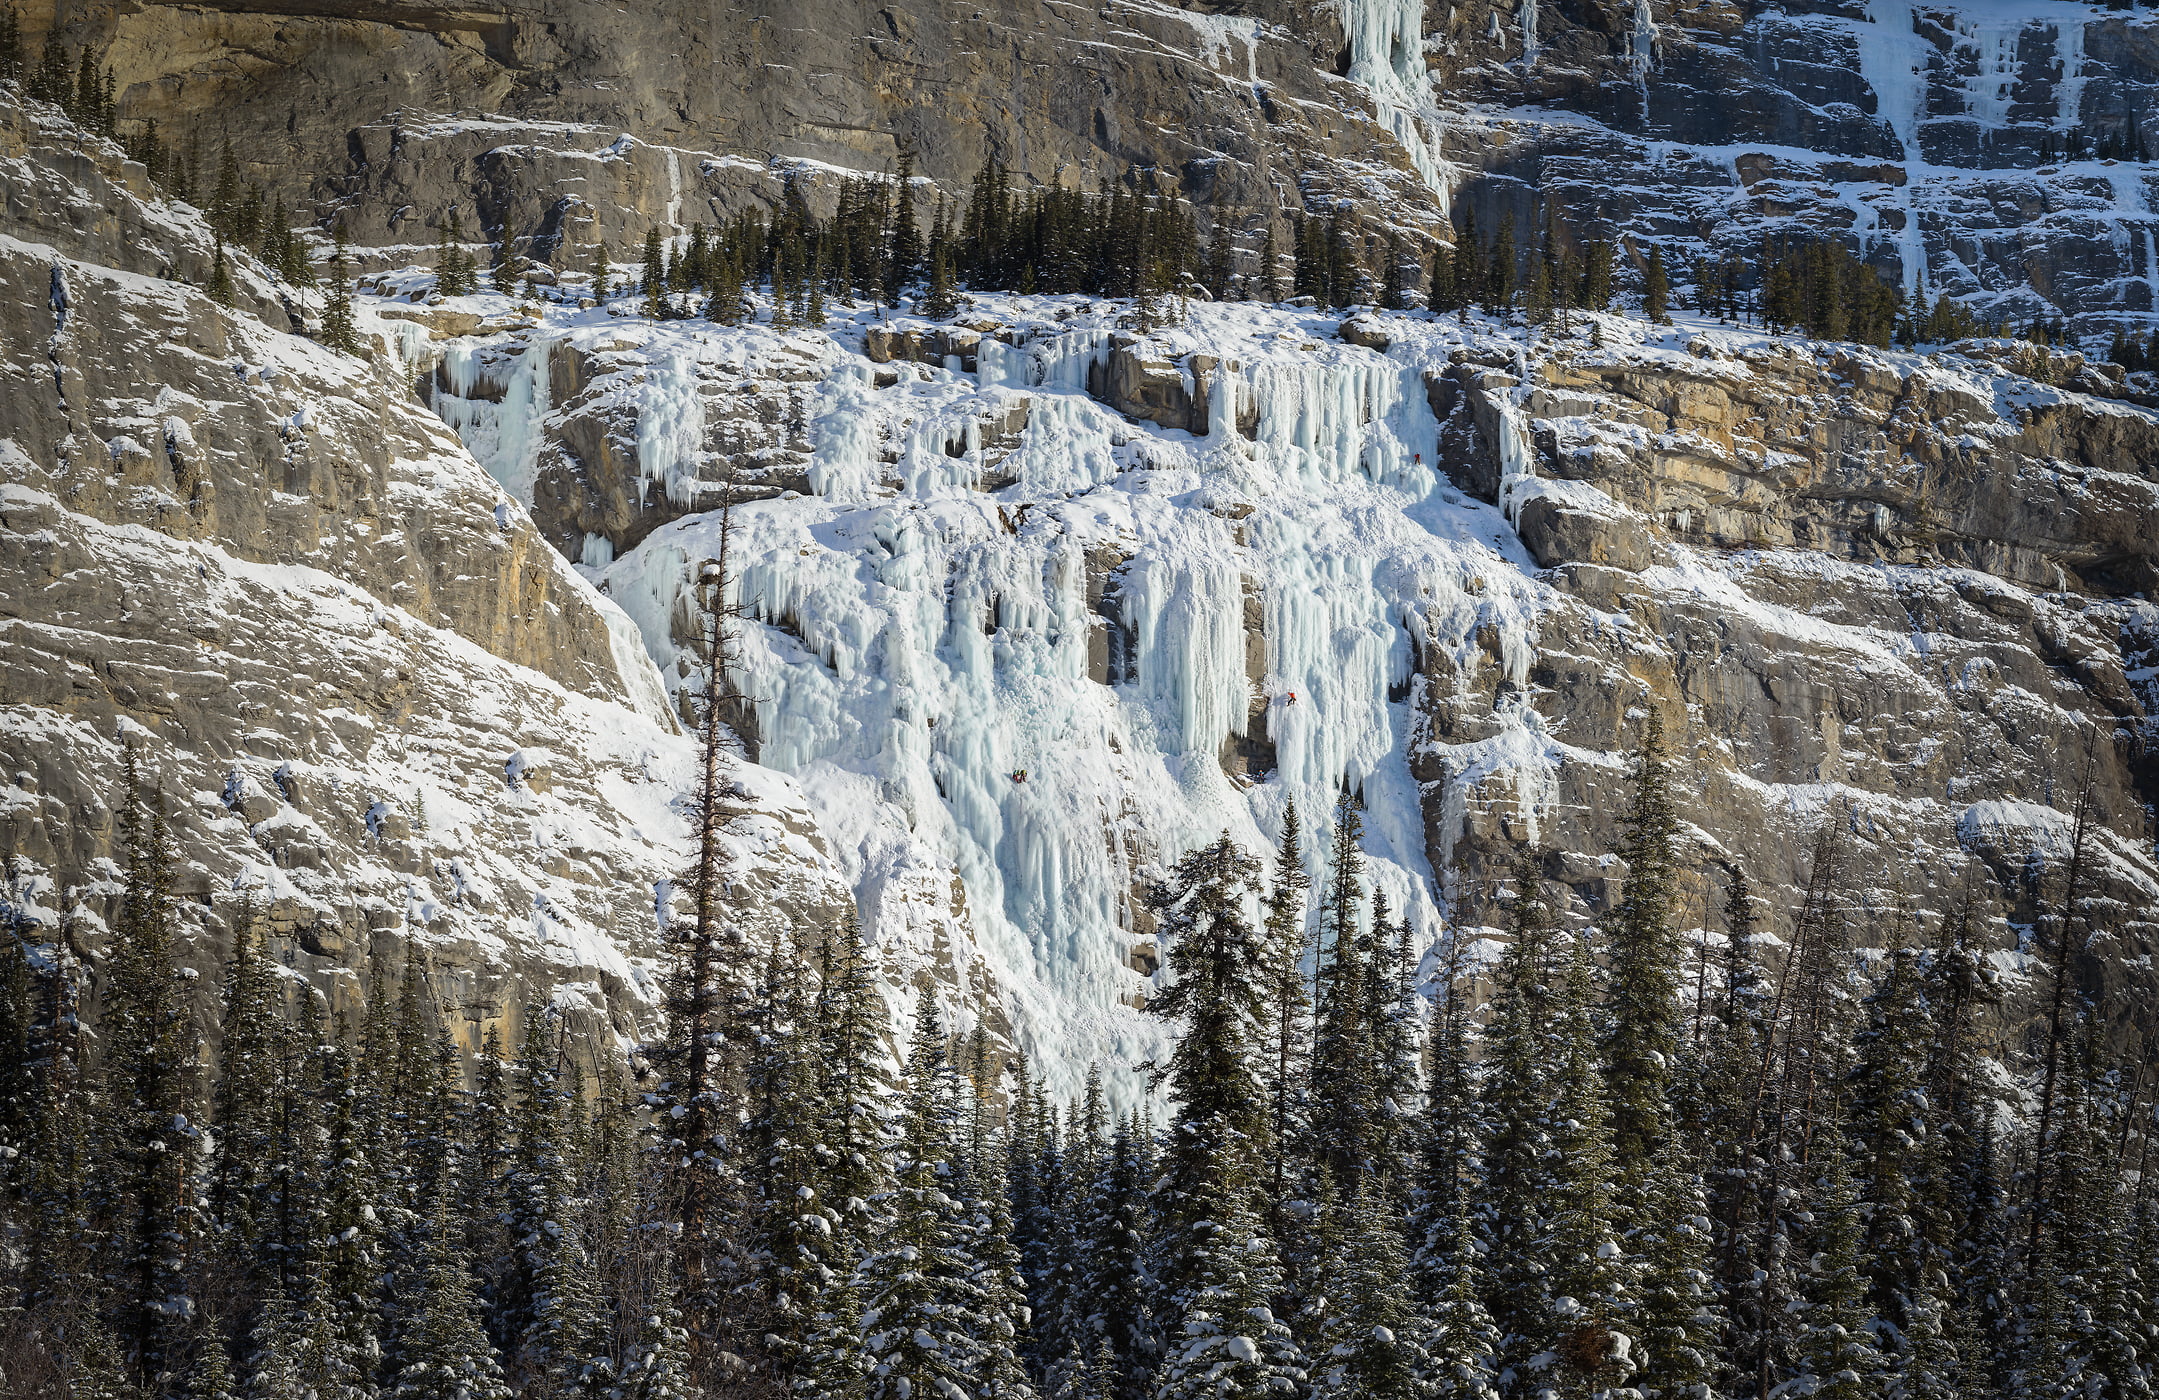 400 megapixels! A very high resolution, large-format VAST photo print of ice climbers on a rock wall; landscape photograph created by Scott Dimond on the Weeping Wall along the Icefields Parkway in Banff National Park, Alberta, Canada